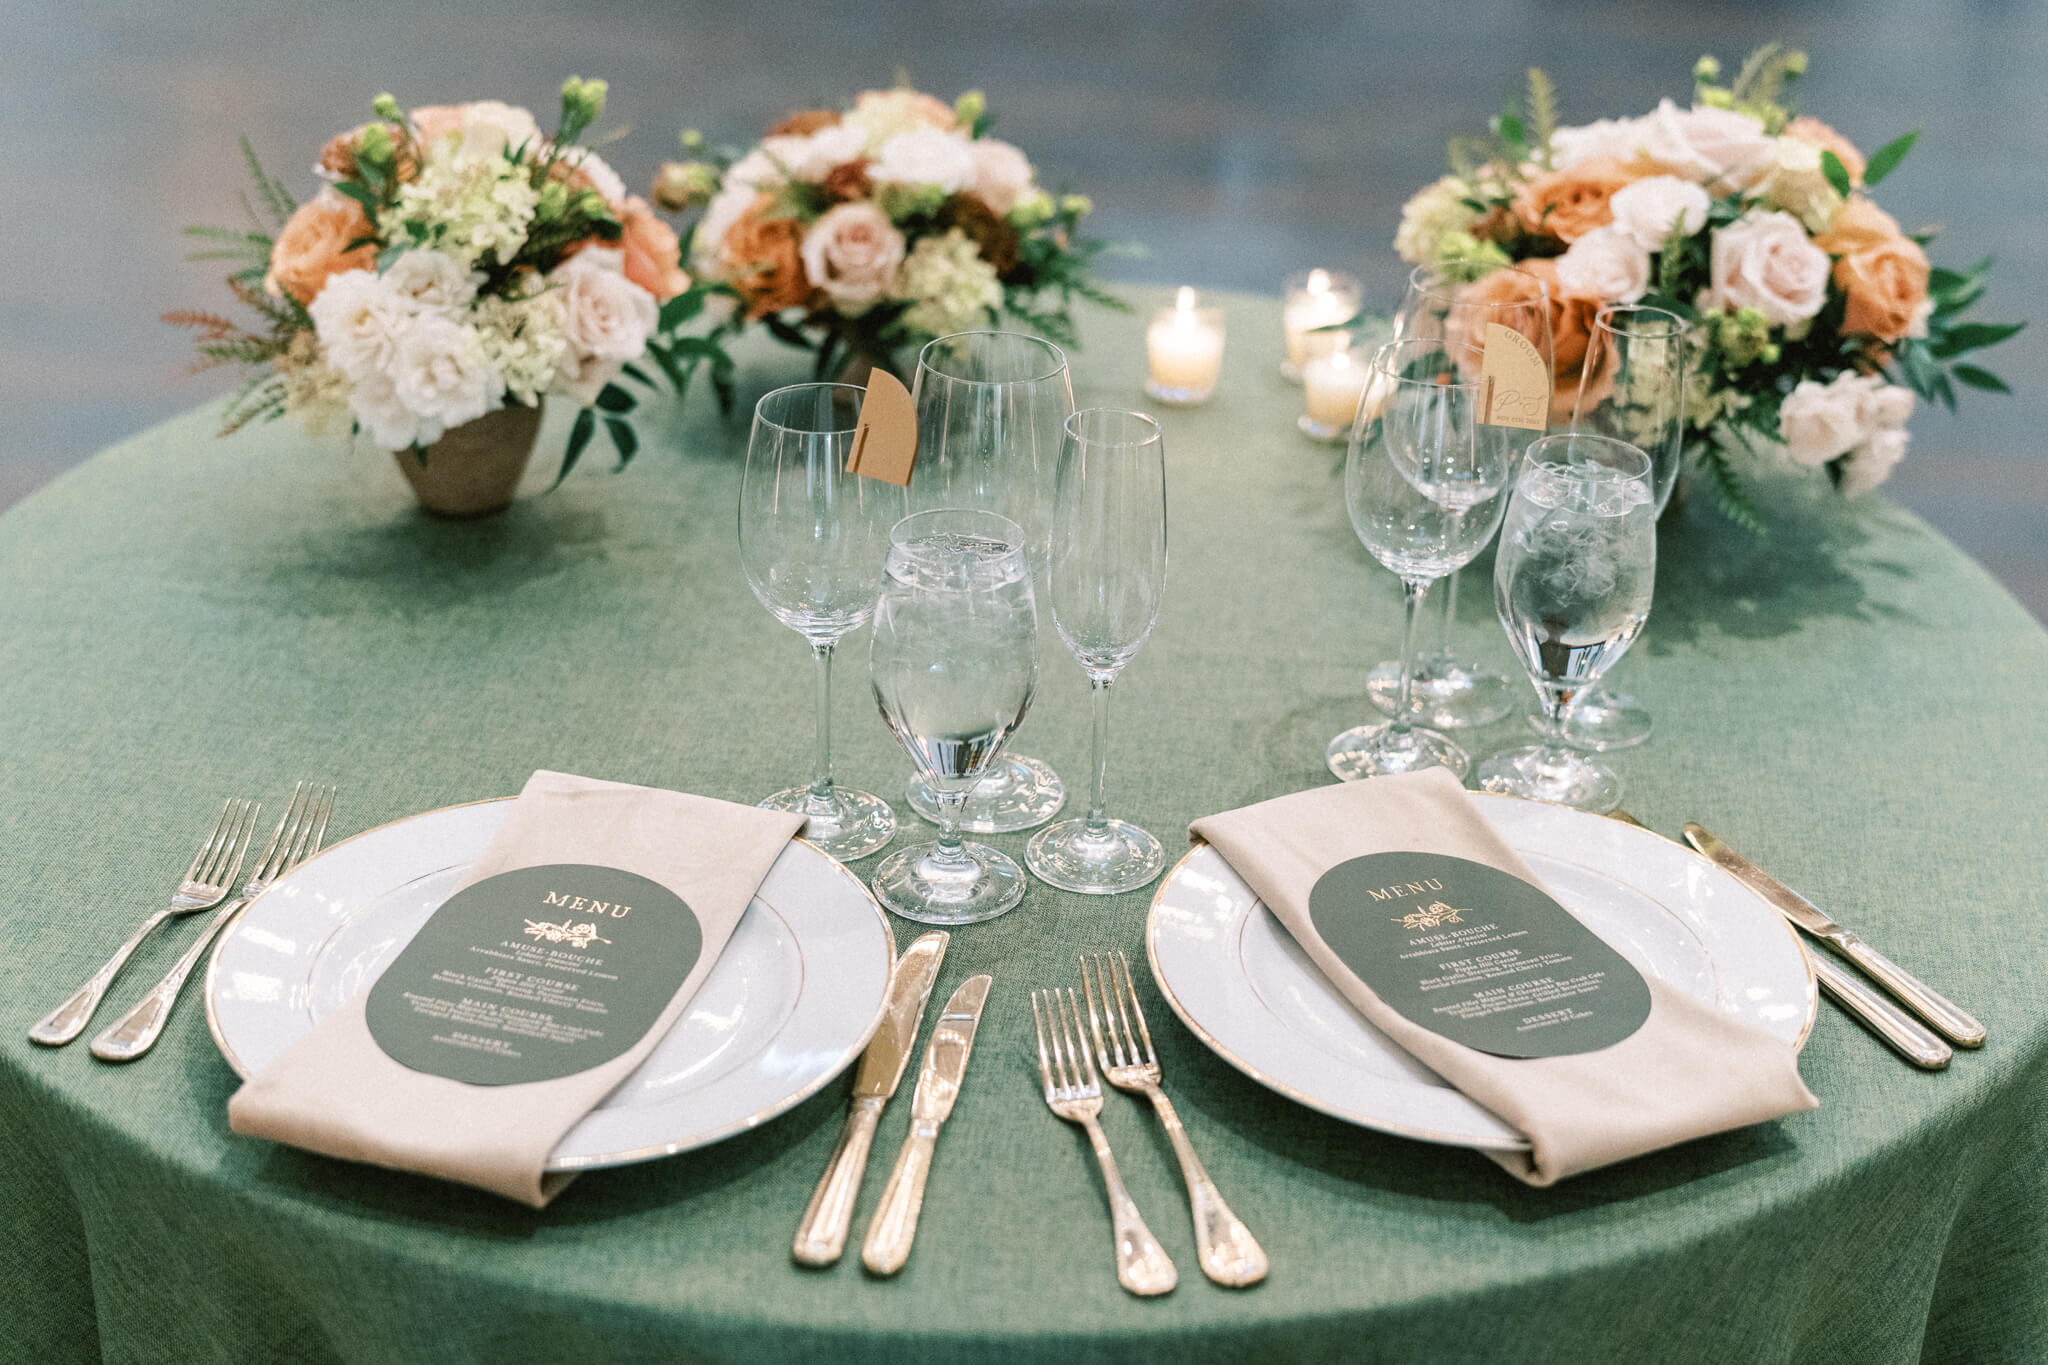 Closeup of a sweetheart tablescape with plates, menus, flatware, glasses, candles and florals on a green tablecloth.